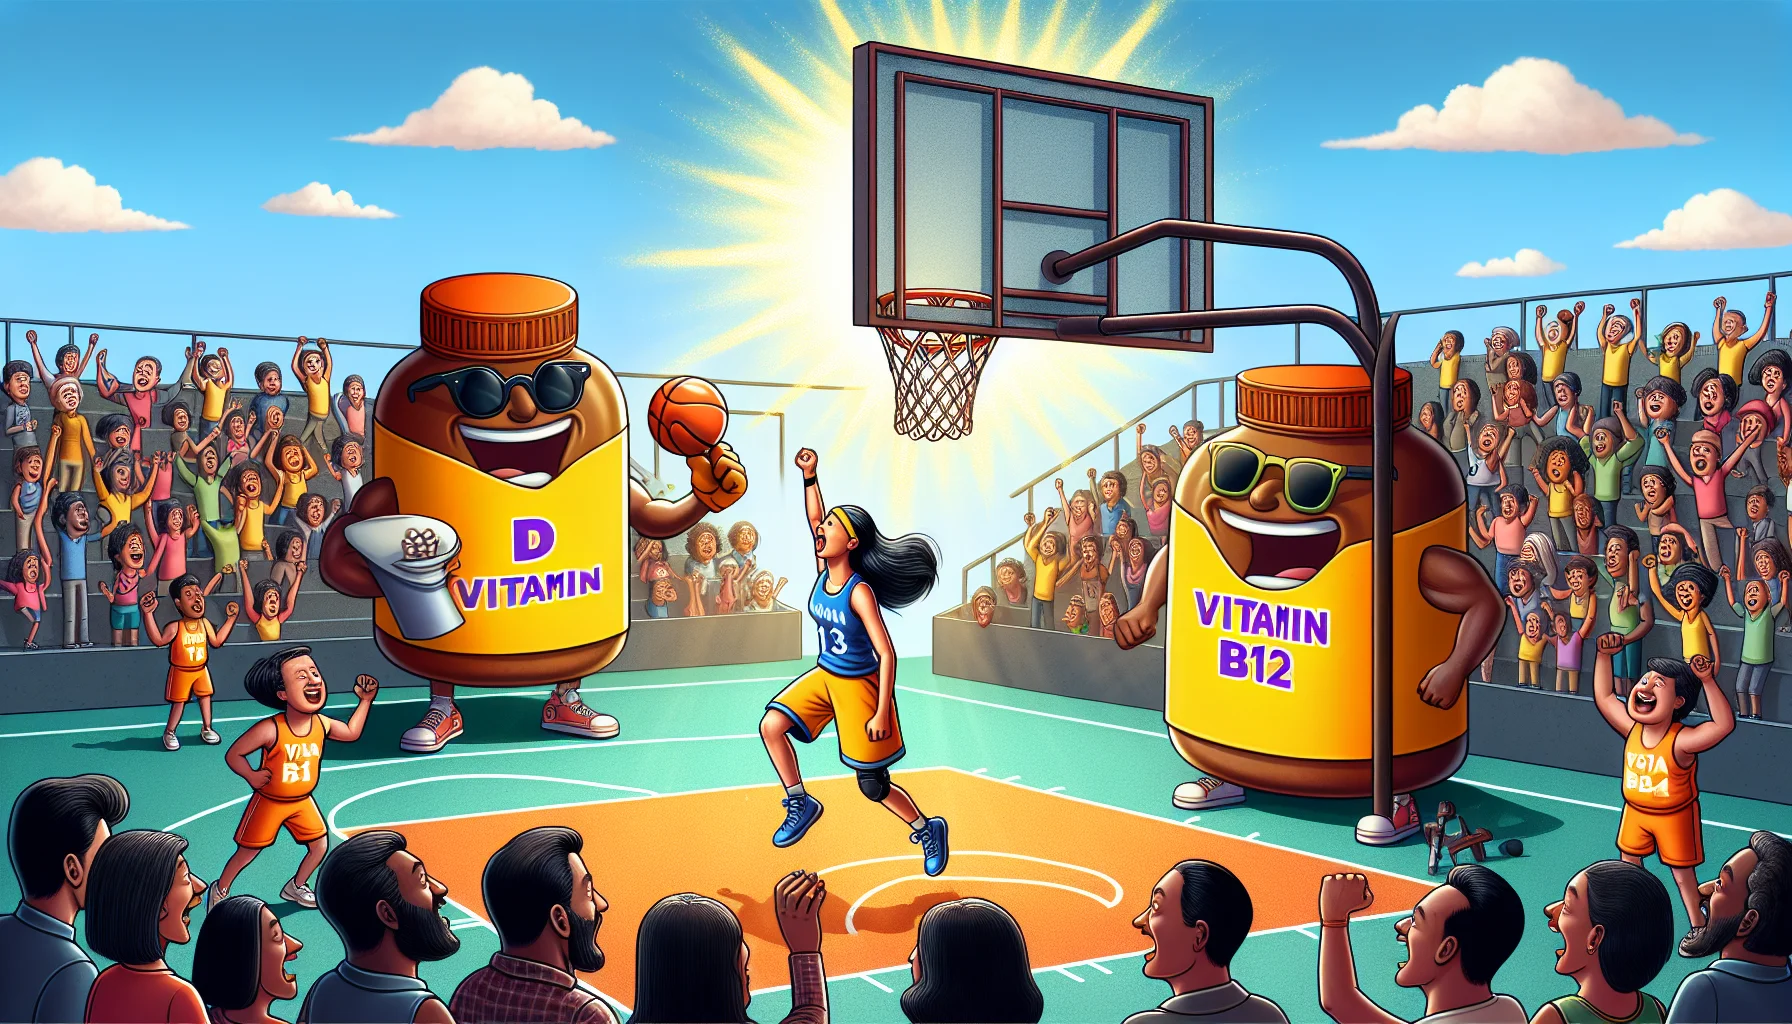 Illustrate a humorous yet informative scene to display the benefits of combining Vitamin D and B12 supplements for sports. Picture this: a sunny basketball court, a South Asian female basketball player effectively performing a slam dunk, her energy represented by a luminous light surrounding her. Beside the court, there's a giant bottle of Vitamin D, personified, wearing sunglasses and cheering with a foam finger. On the other side, there's a Vitamin B12 bottle, personified, holding a megaphone, encouraging the player. Surrounding the court, diverse spectators are in awe by her energy boost, some holding signs saying, 'Vitamin Power!'